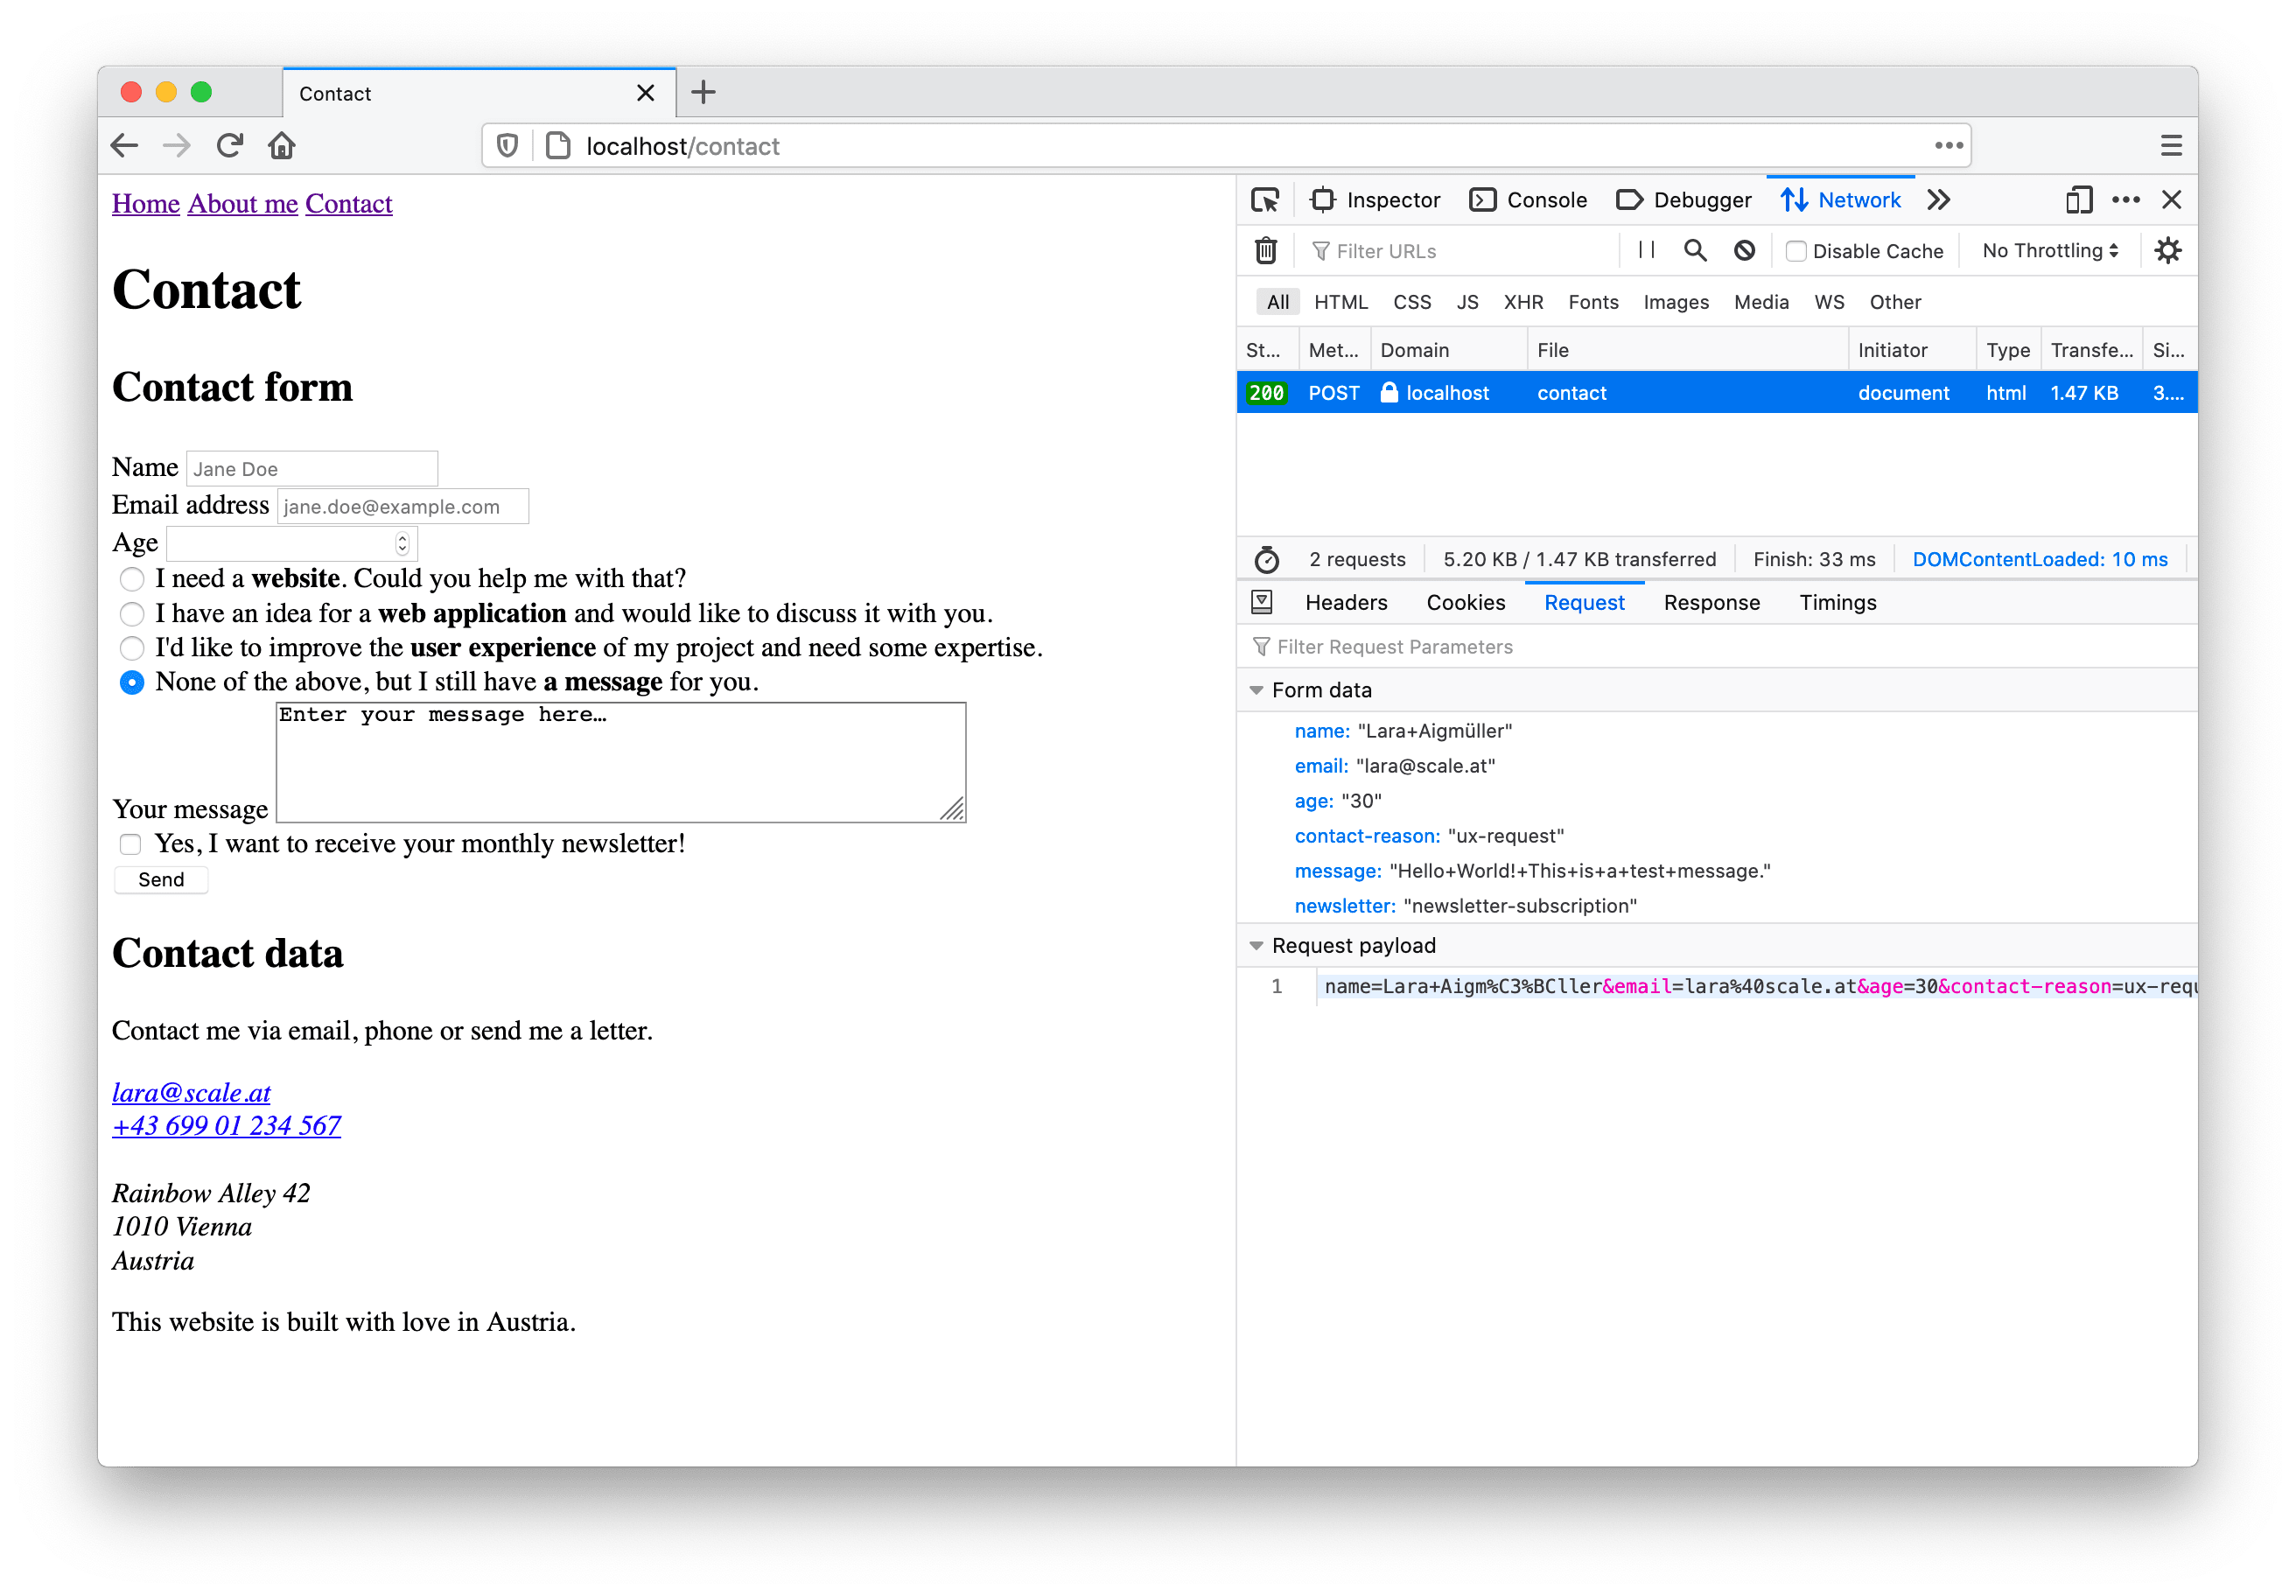 Submitted form data within the developer tool’s network tab.